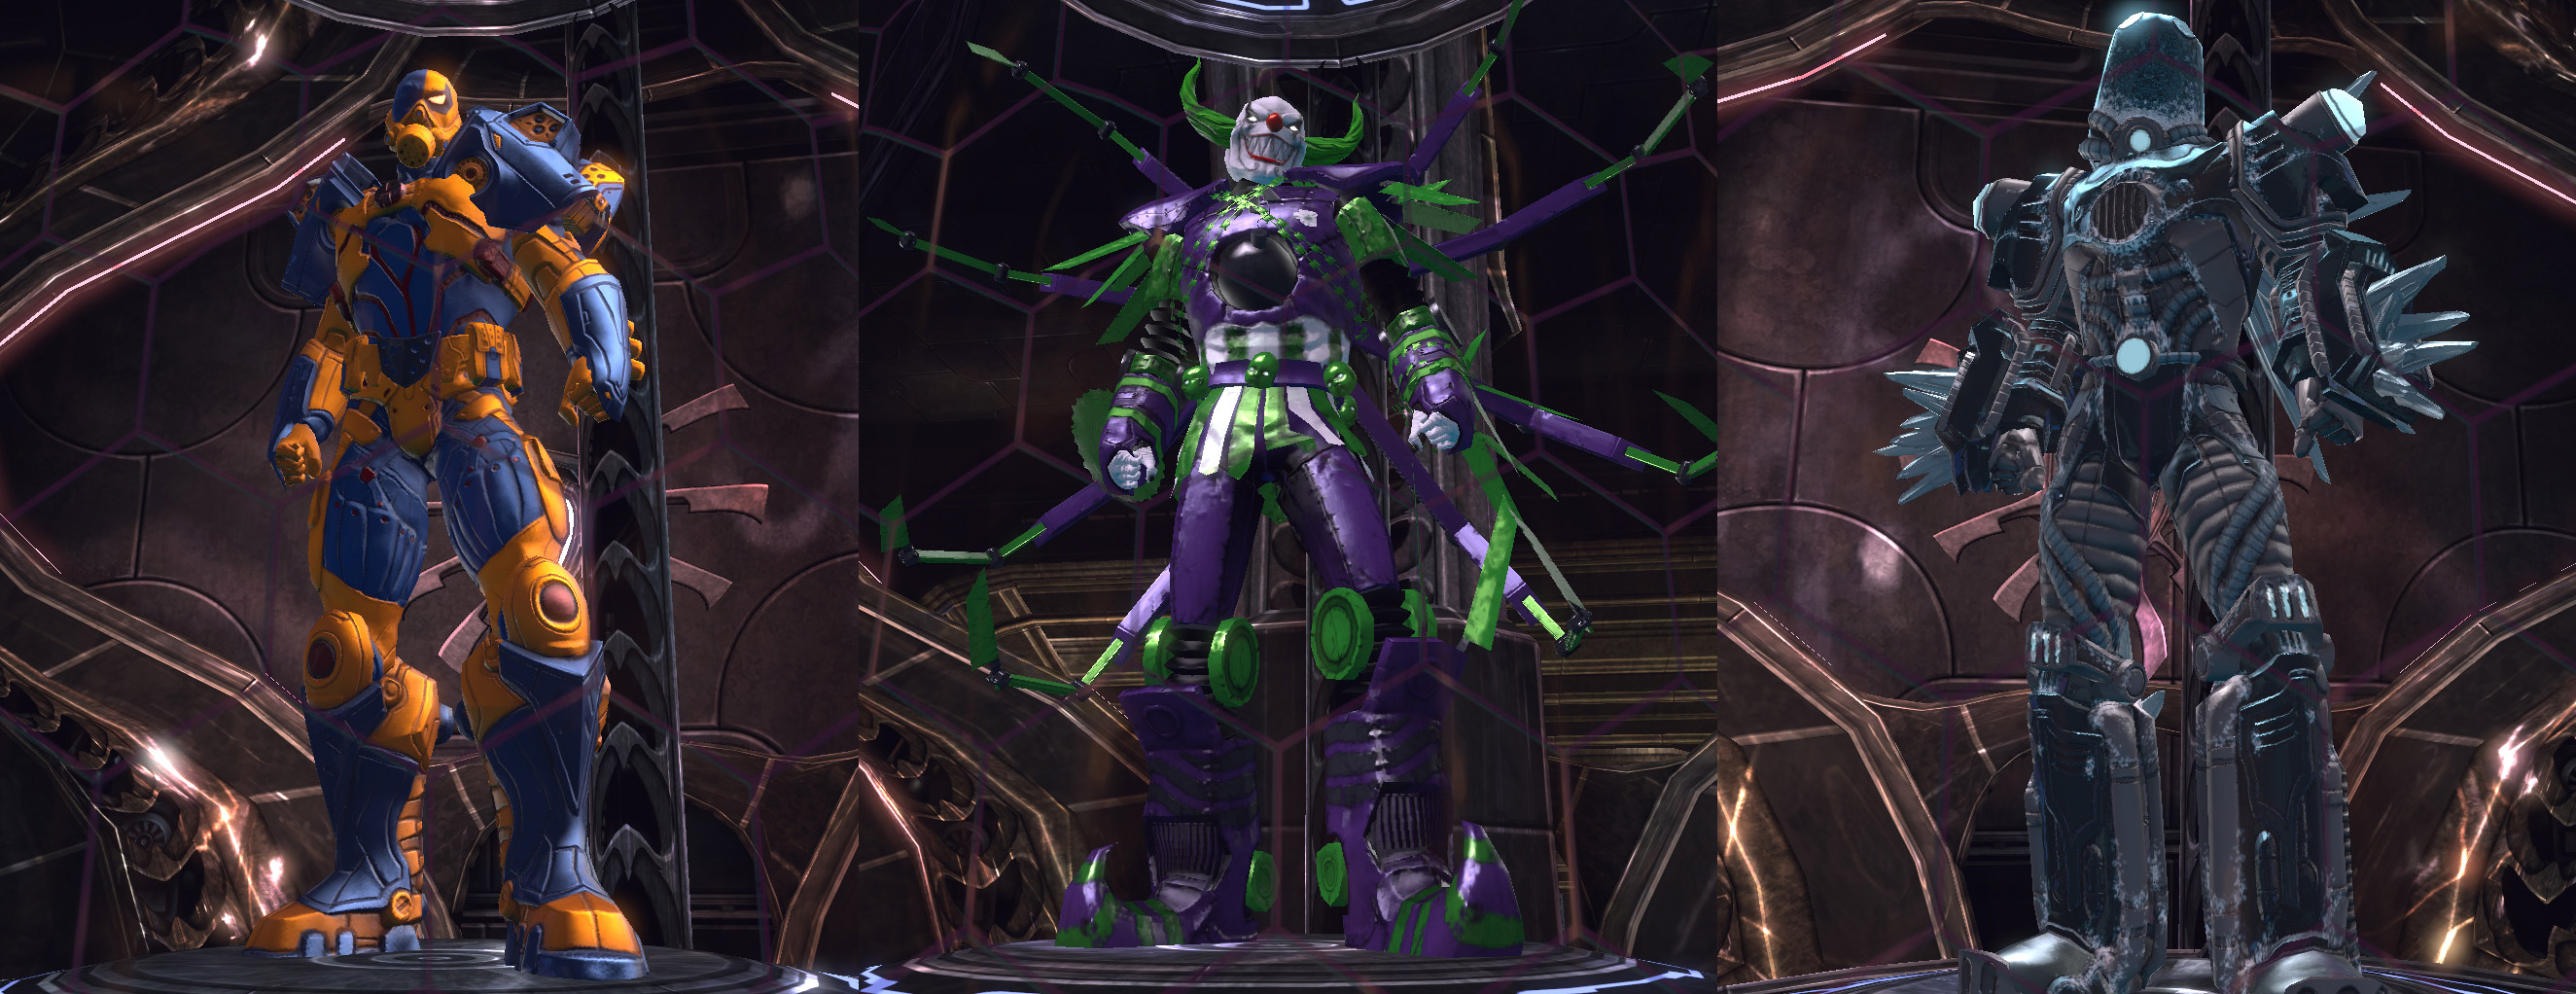 DC Universe Online' Introduces Teen Titans: The Judas Contract, Now Live